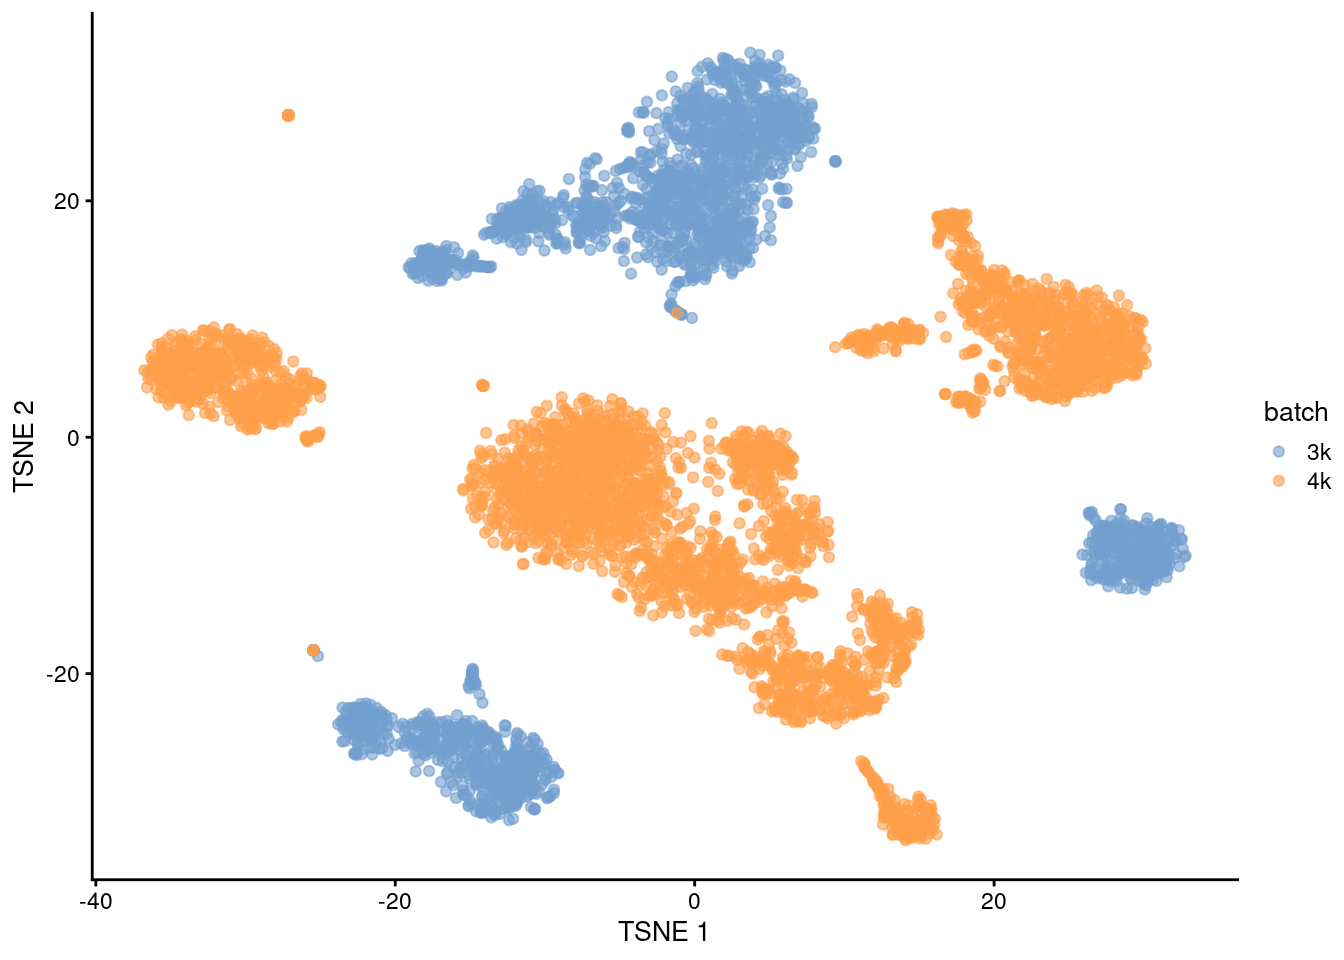 $t$-SNE plot of the PBMC datasets without any batch correction. Each point is a cell that is colored according to its batch of origin.